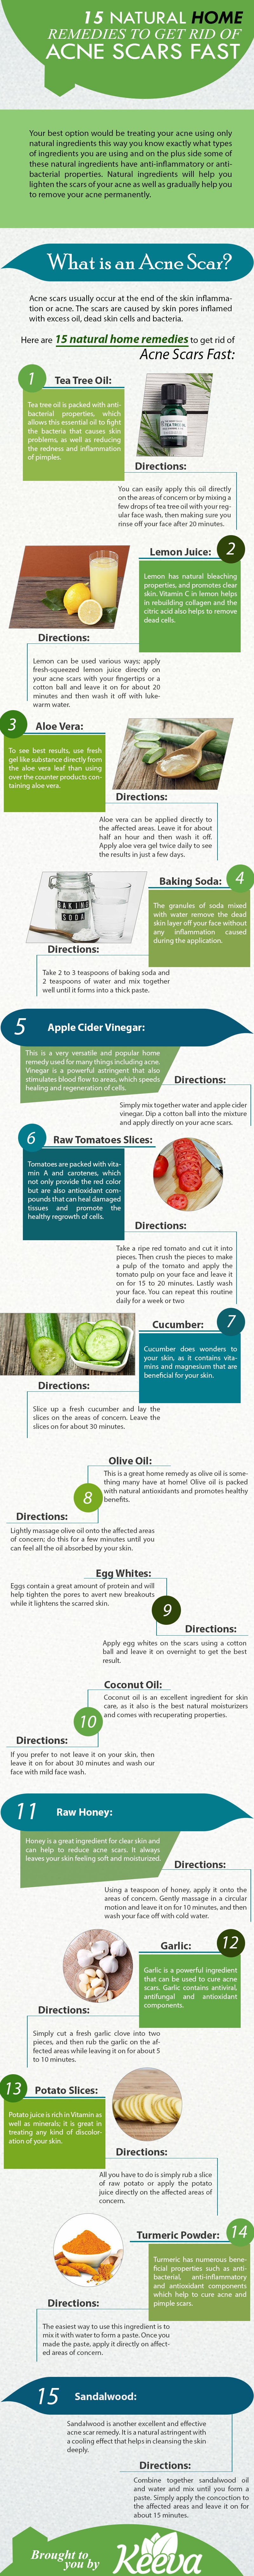 15 Natural Home Remedies To Get Rid Of Acne Scars Fast home remedies to get rid of acne scars fast